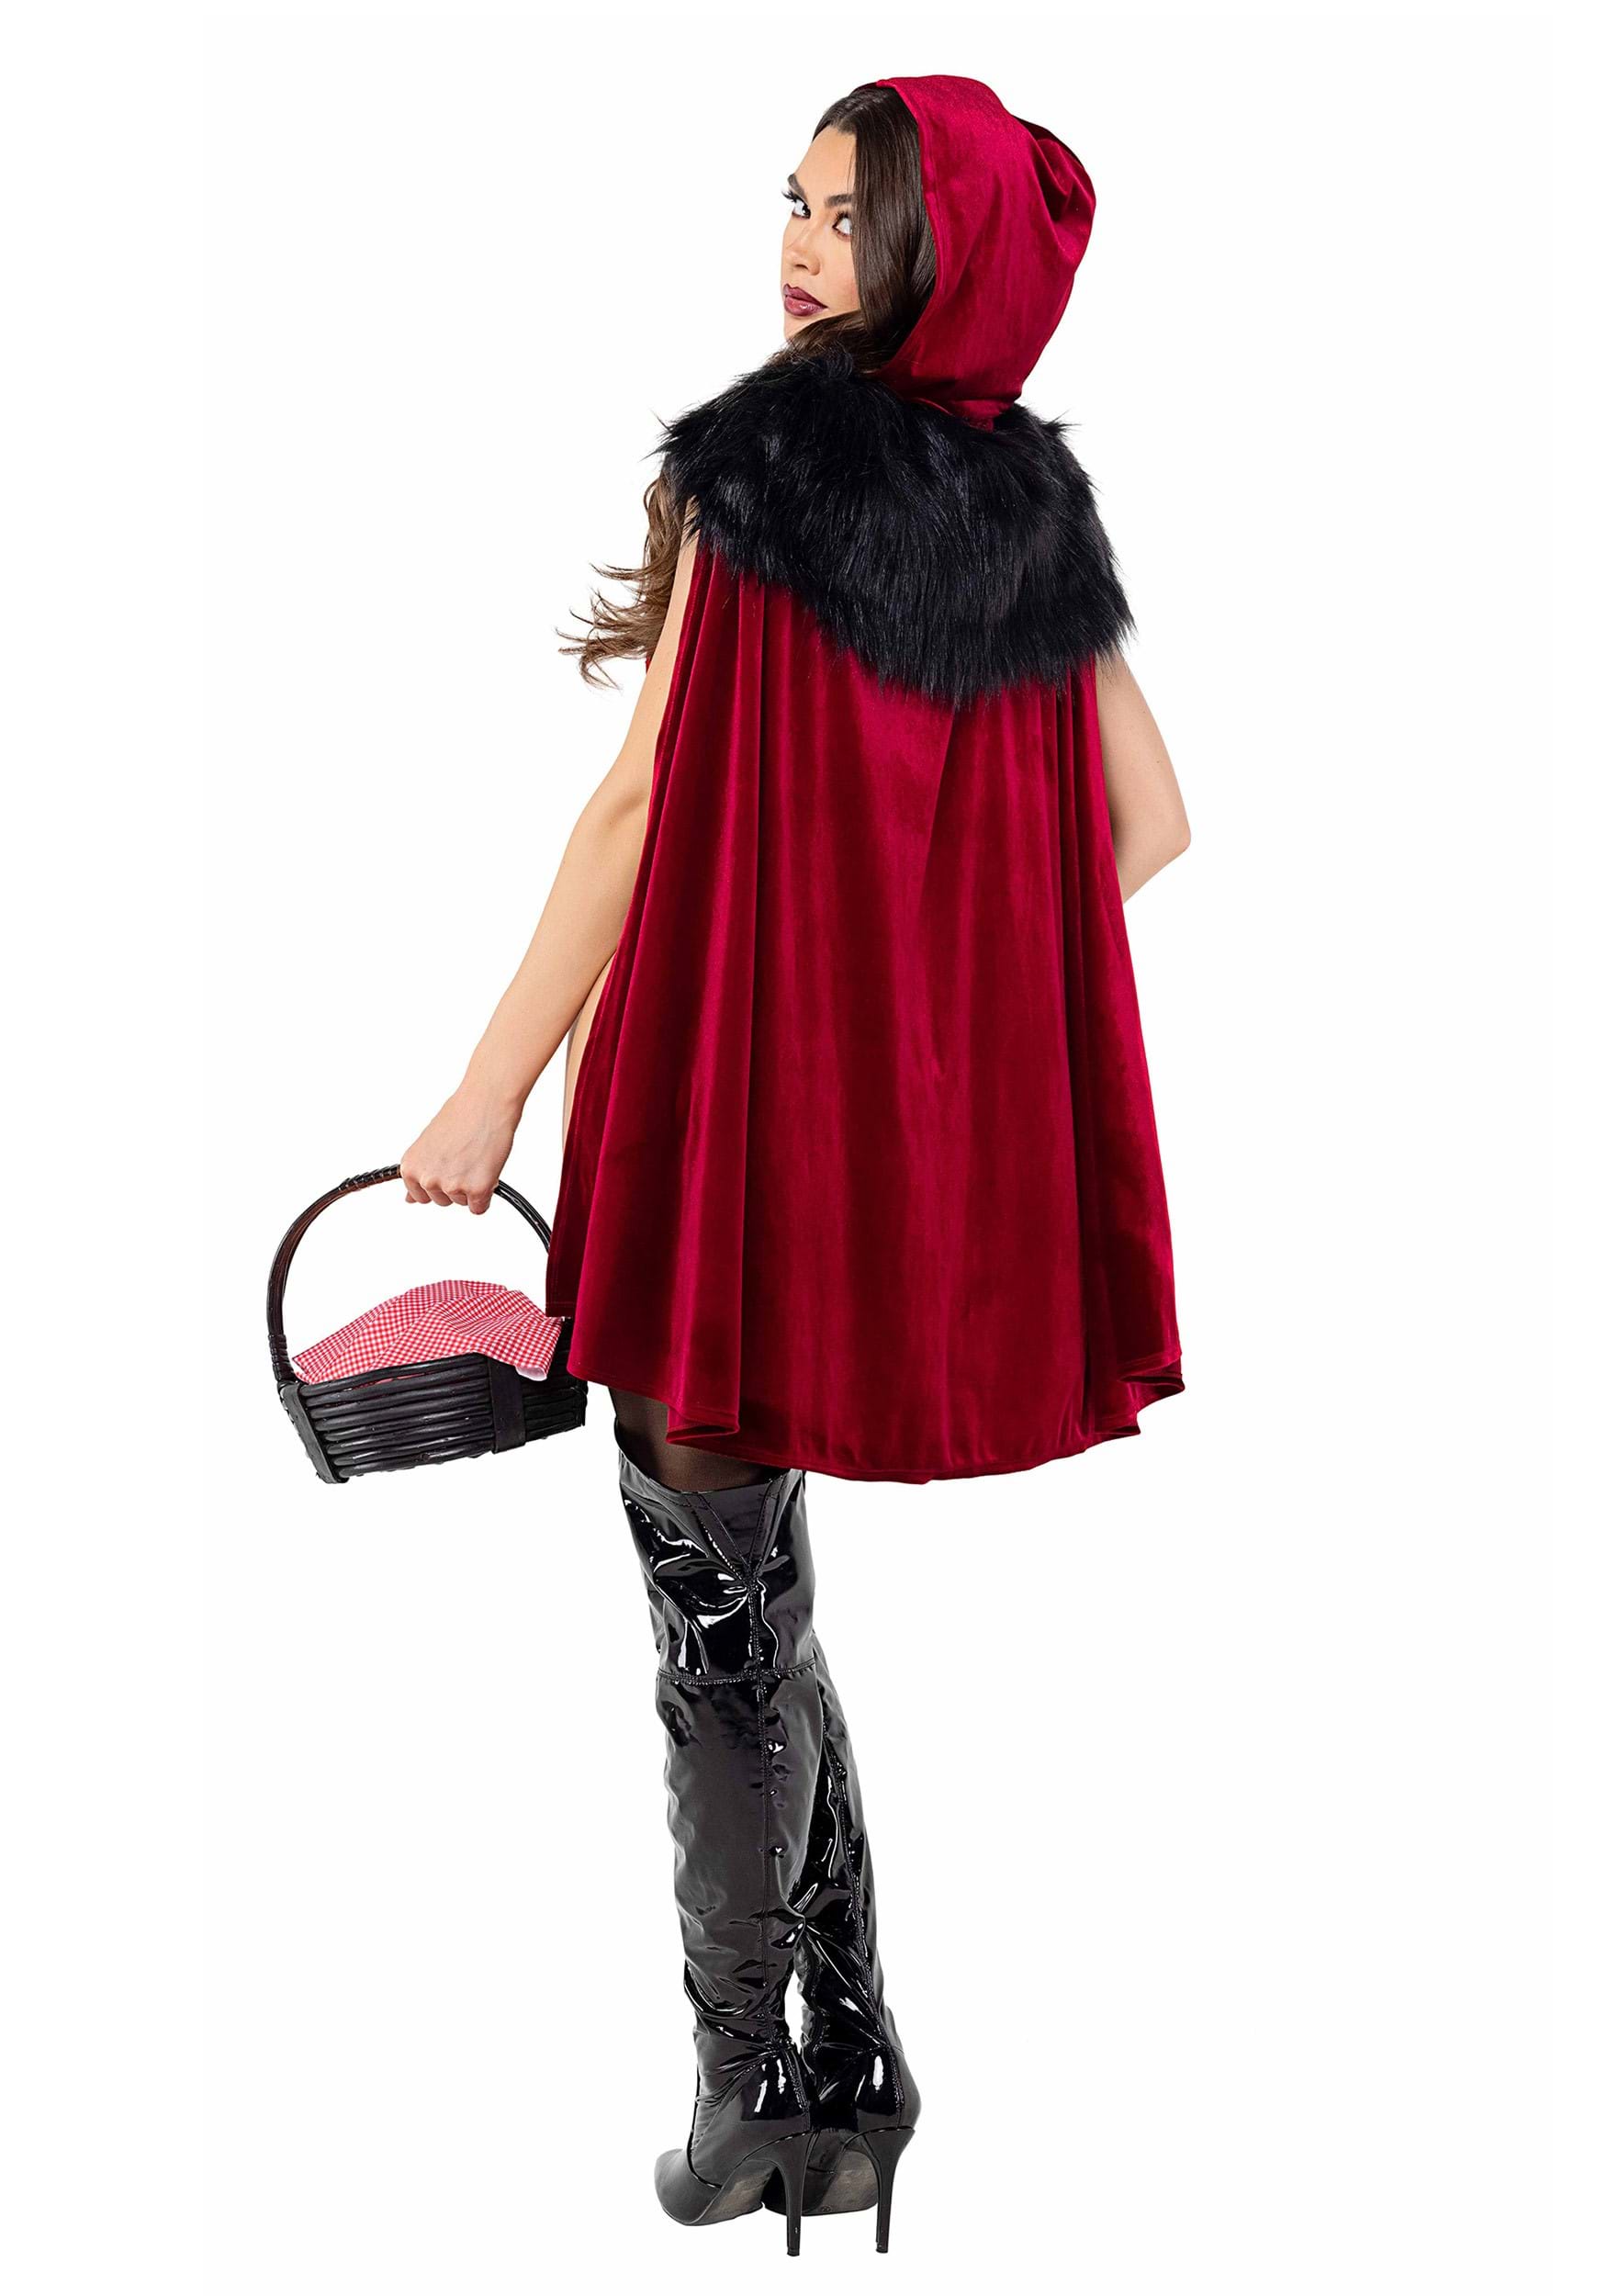 Playboy Red Riding Hood Fancy Dress Costume For Women